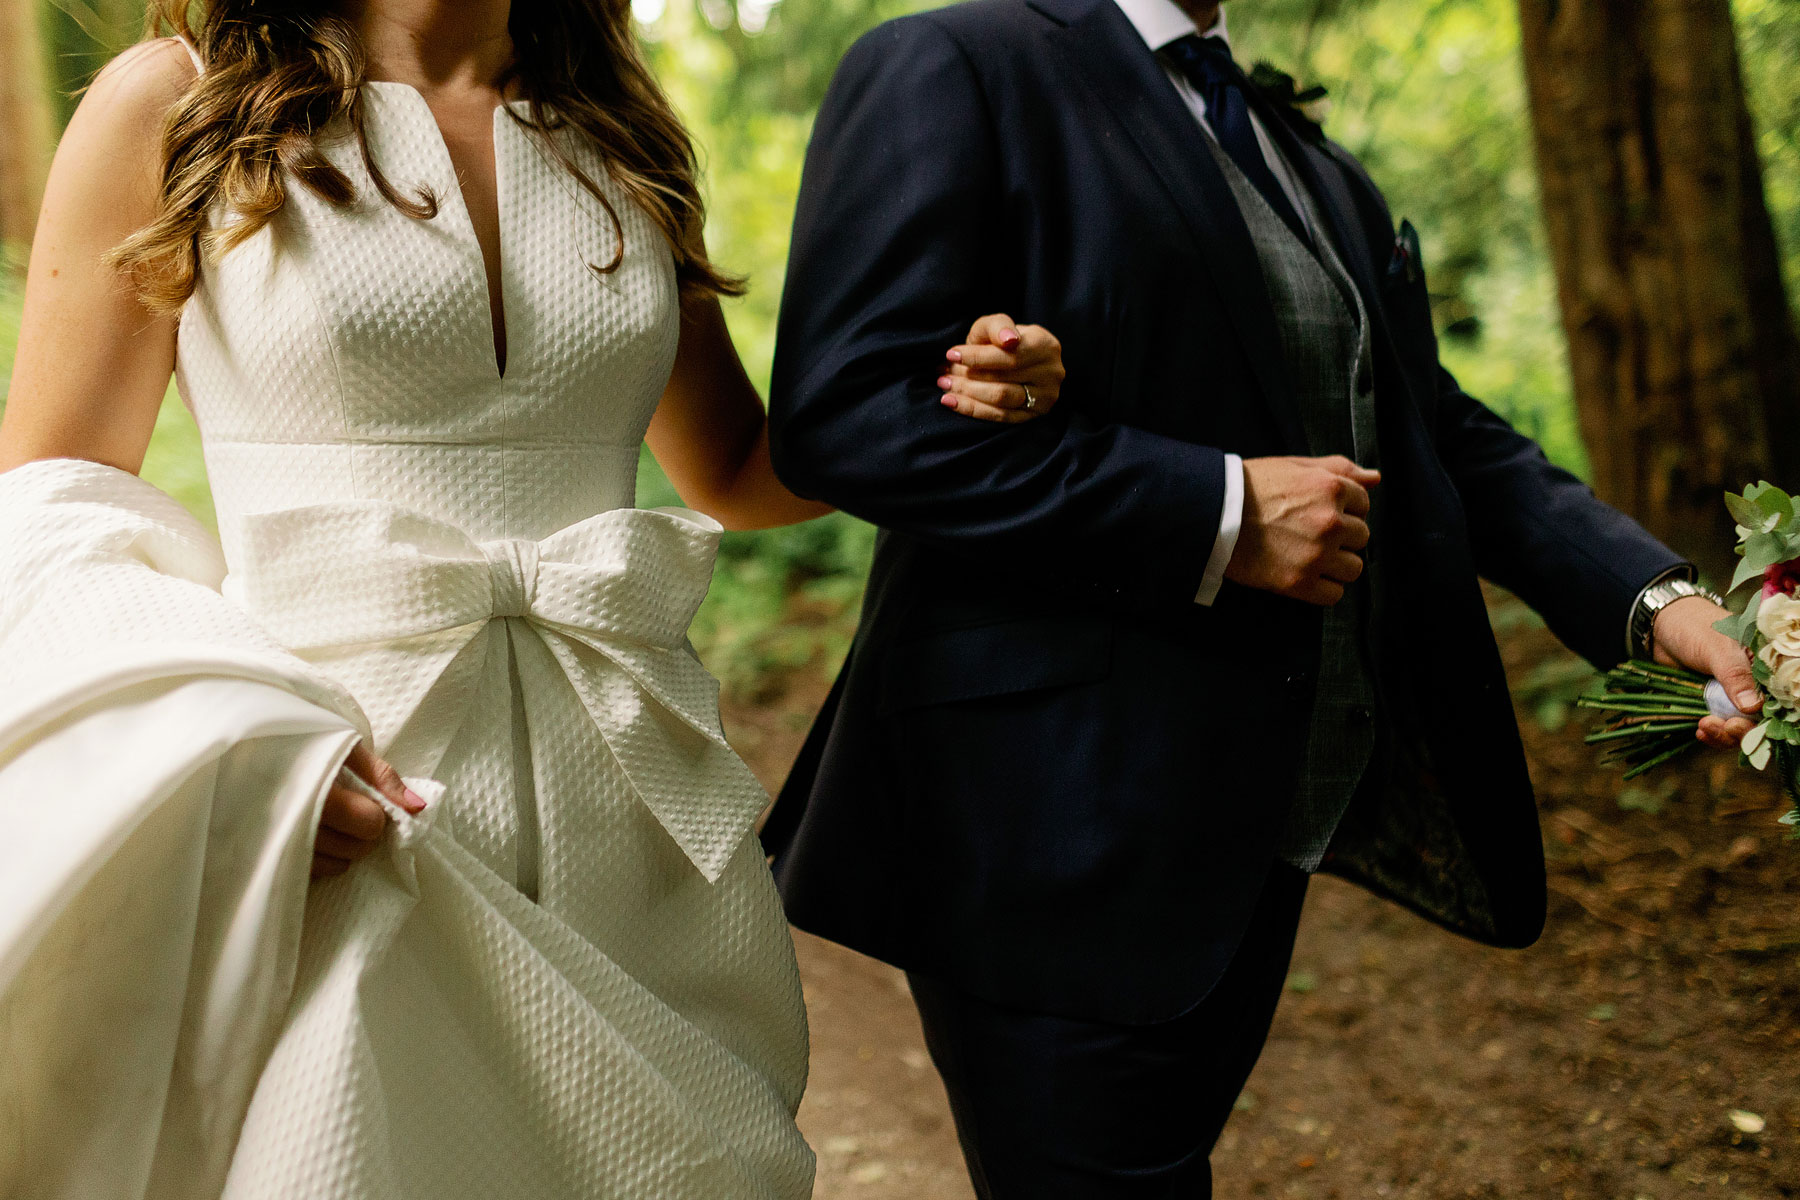 fun and cute couple wedding pictures at bolton abbey